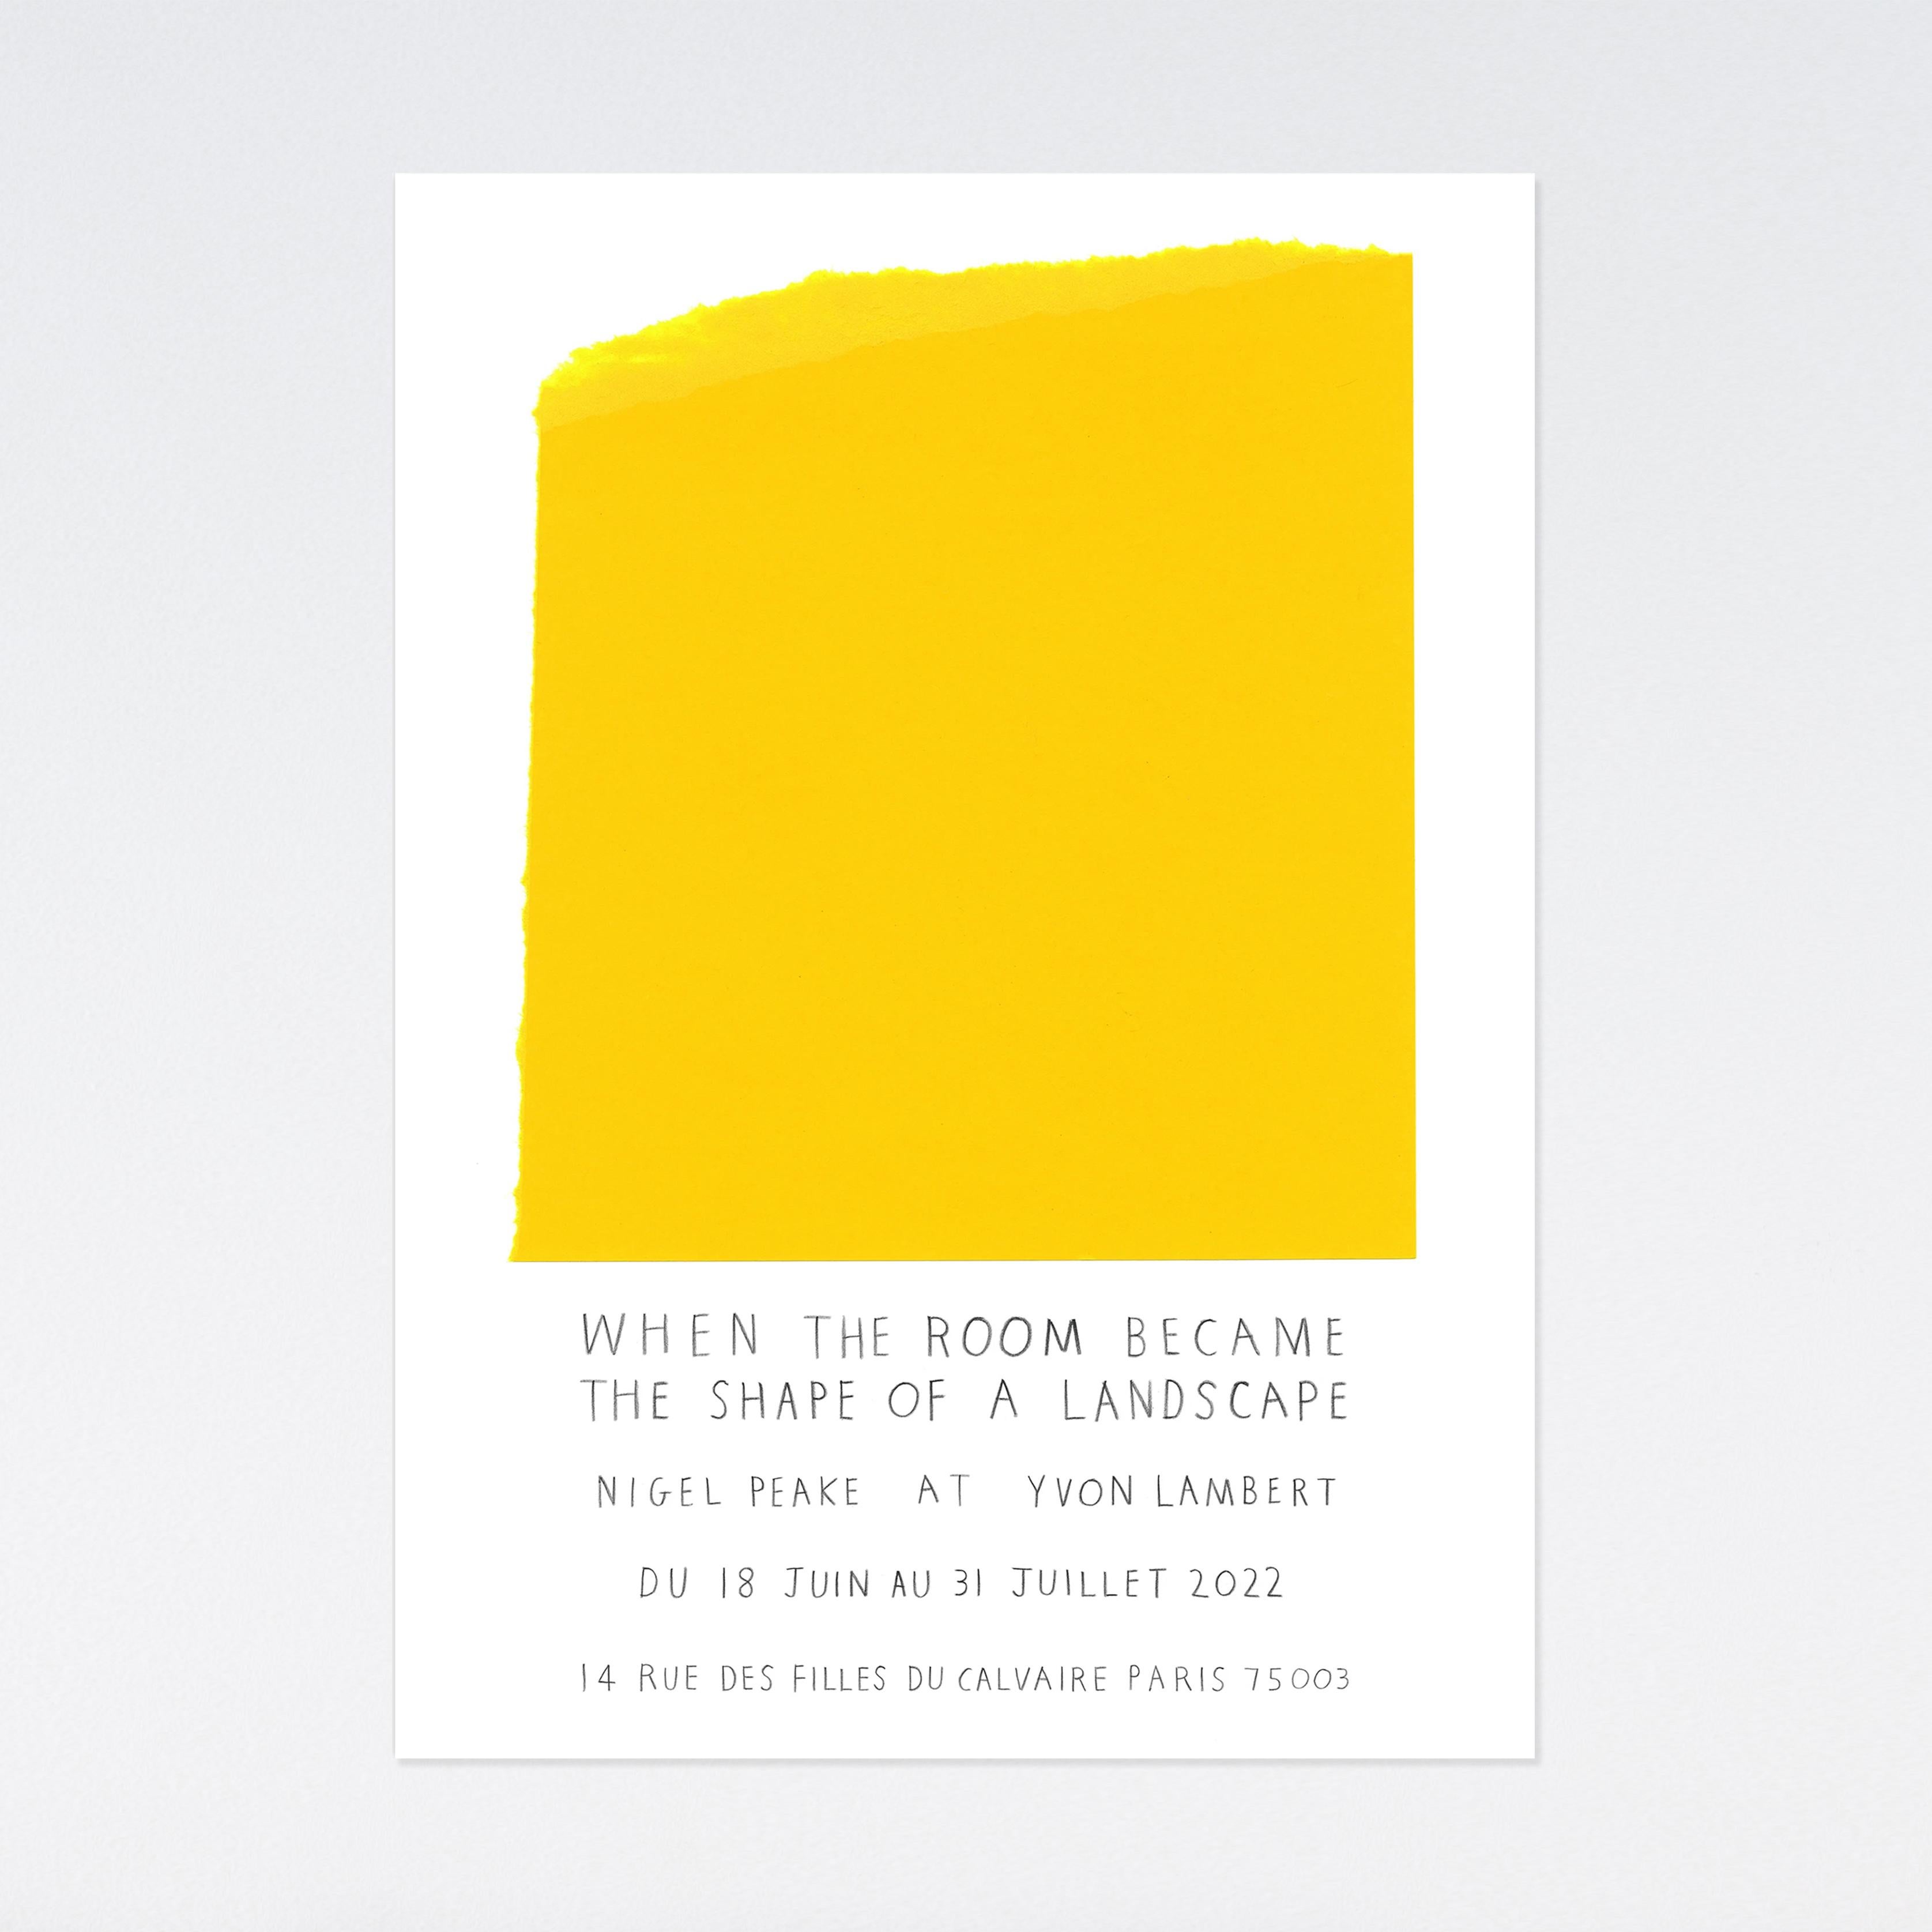 Nigel Peake, When the room became the shape of a landscape, exhibition poster For Sale 1